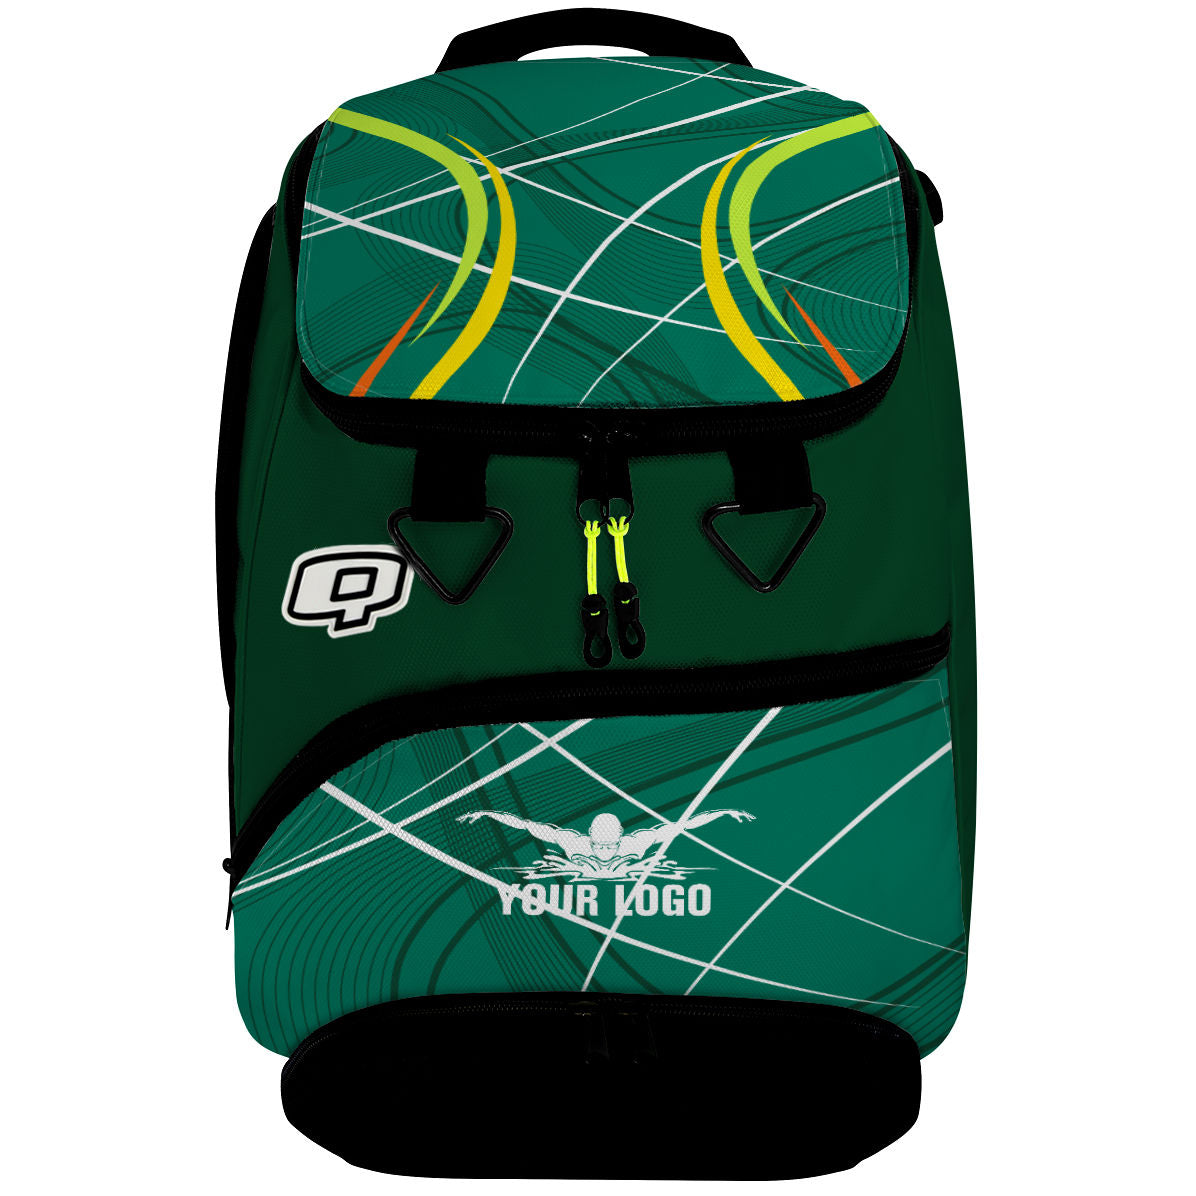 Template05 - Backpack